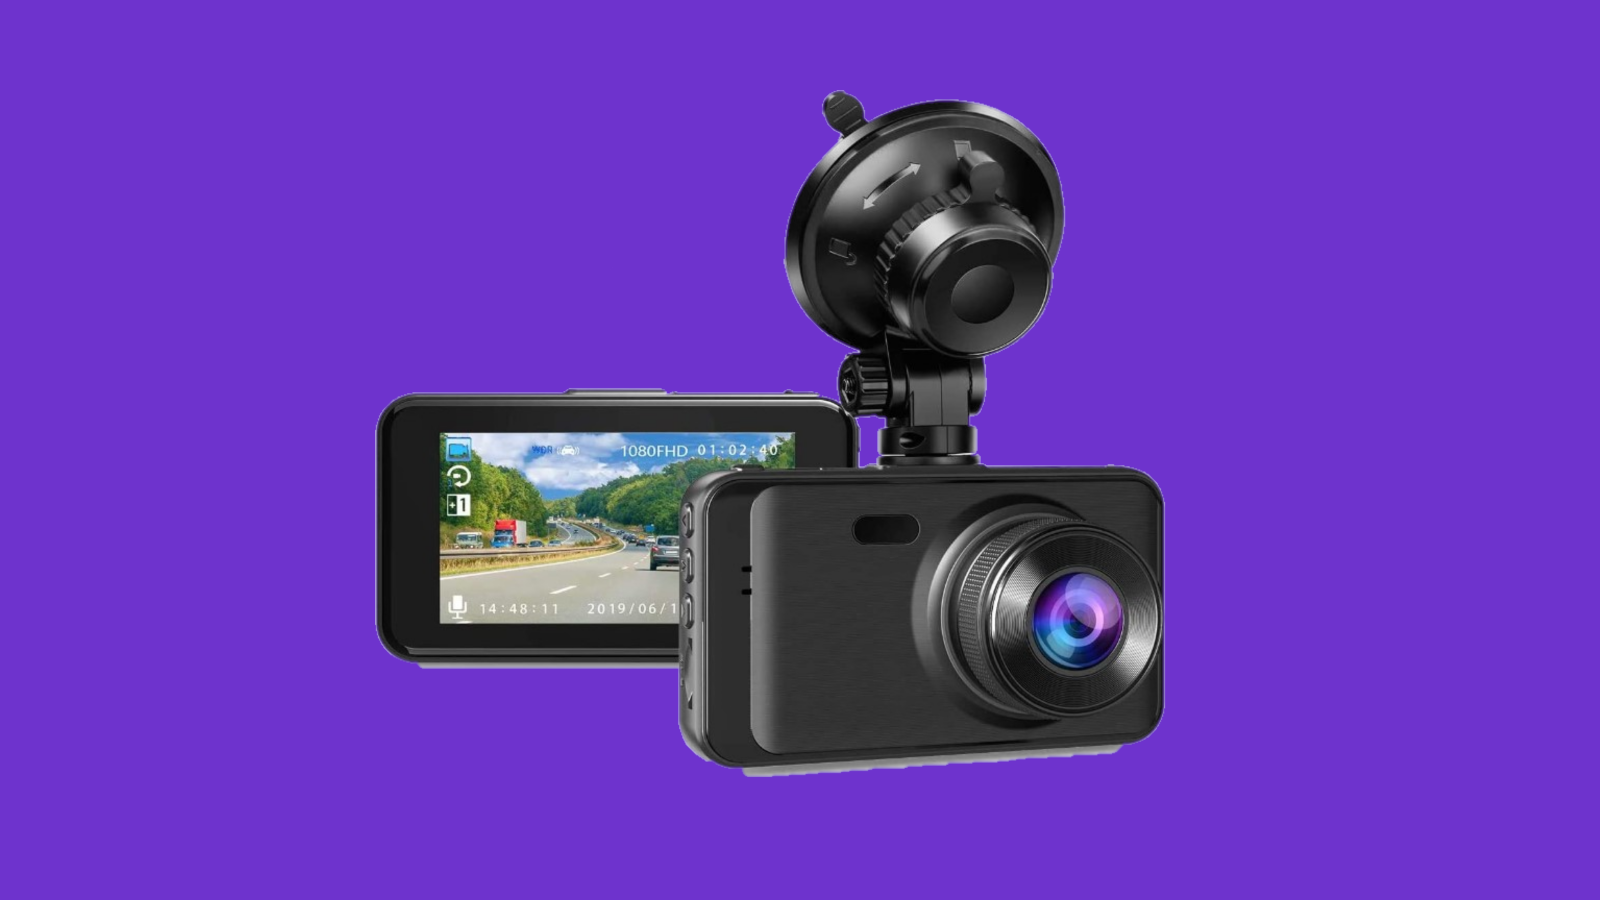 Best Dash Cams: A Buying Guide - Video - CNET